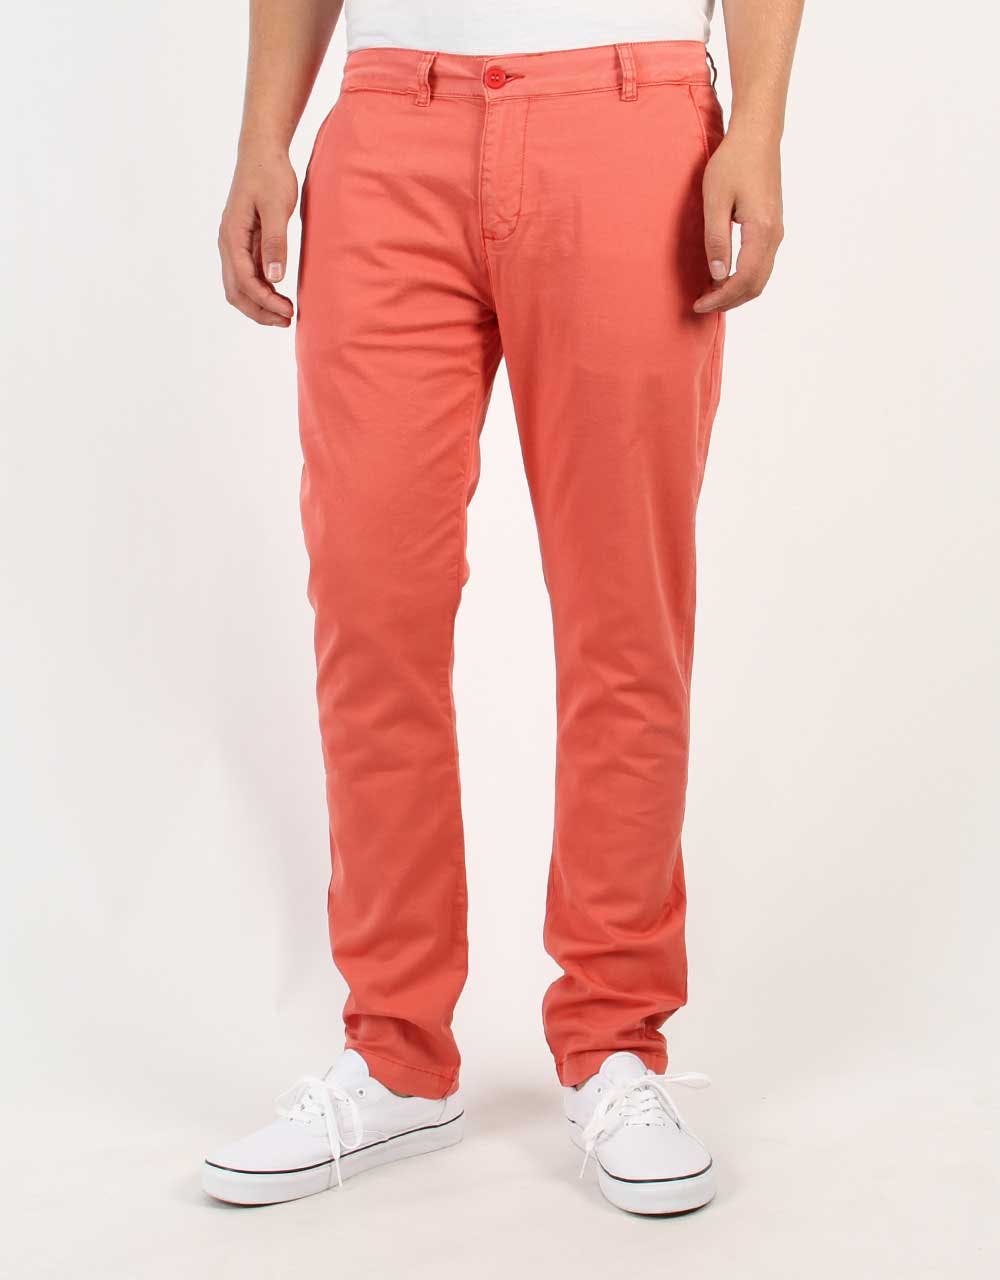 Route One Slim Fit Chinos - Salmon